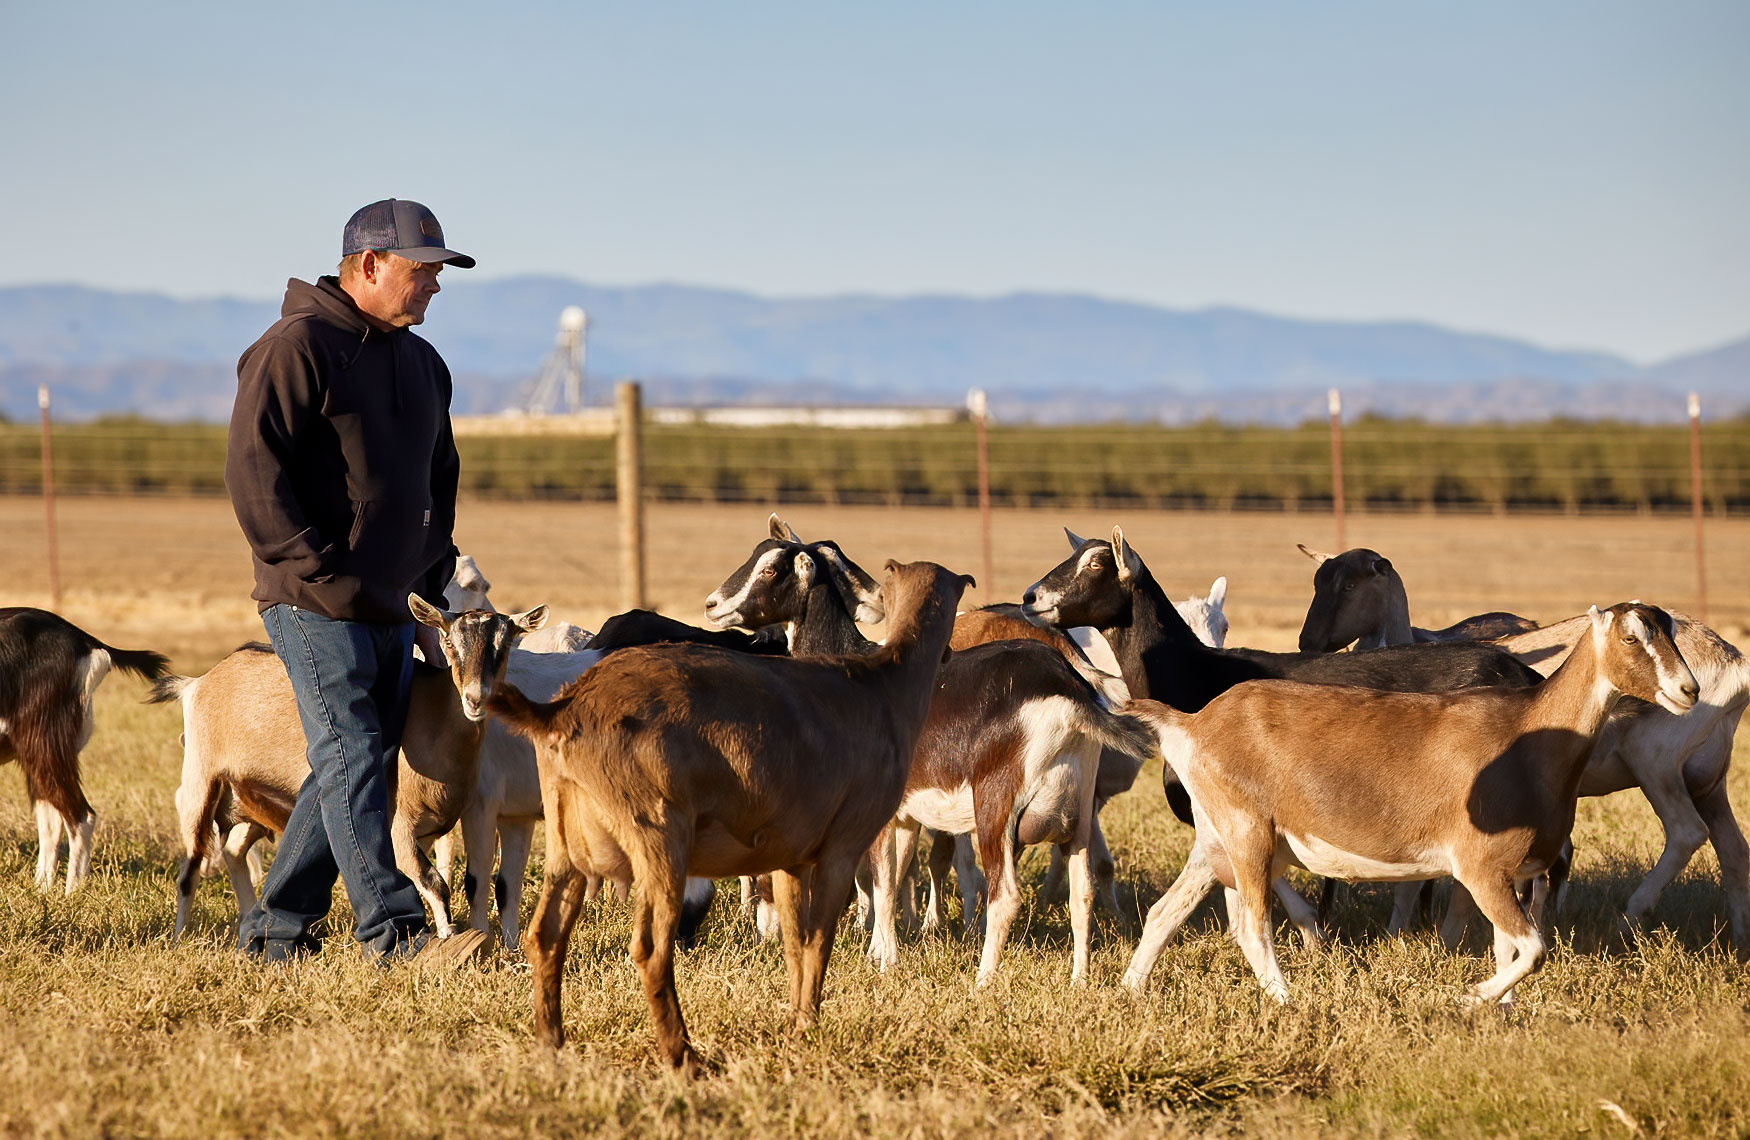 Ed Fumasi with Dairy Goats